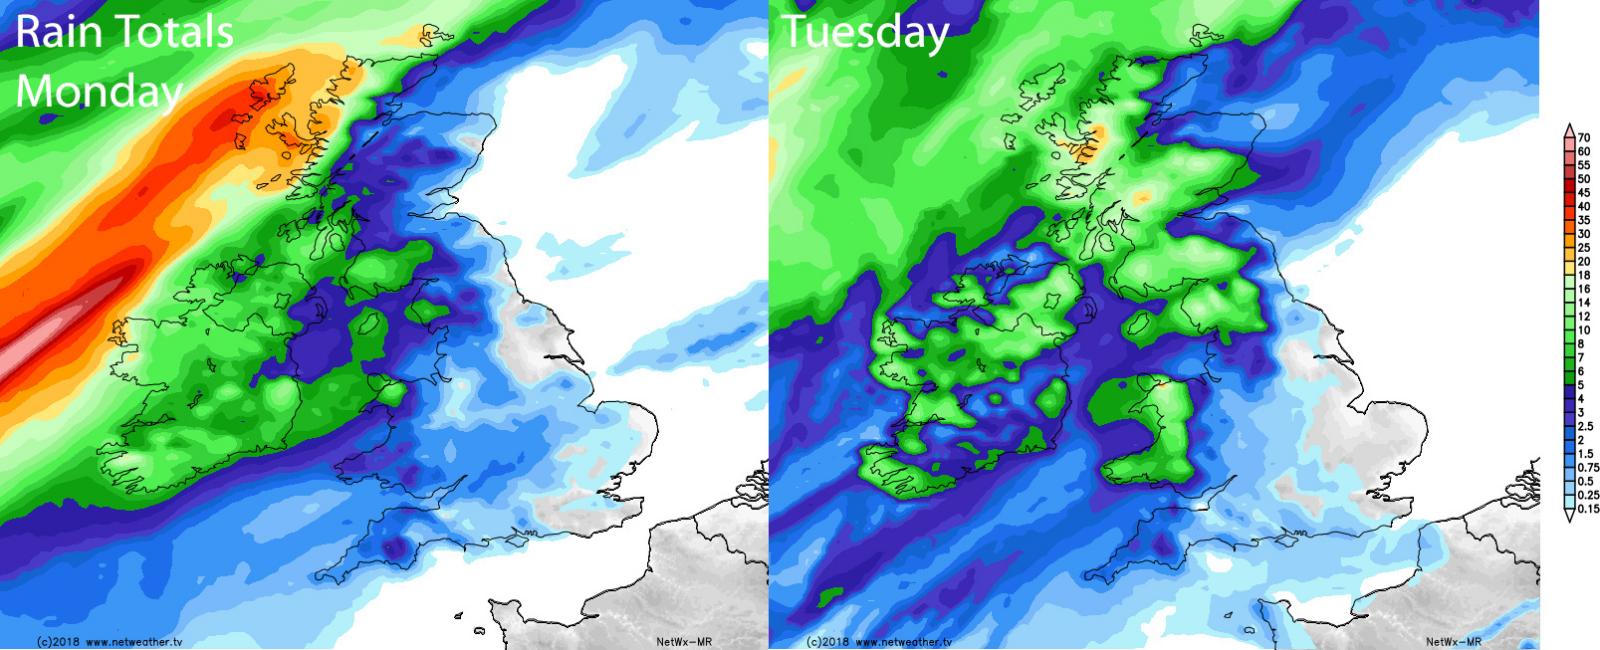 Rain totals on Monday and Tuesday - wettest in the northwest